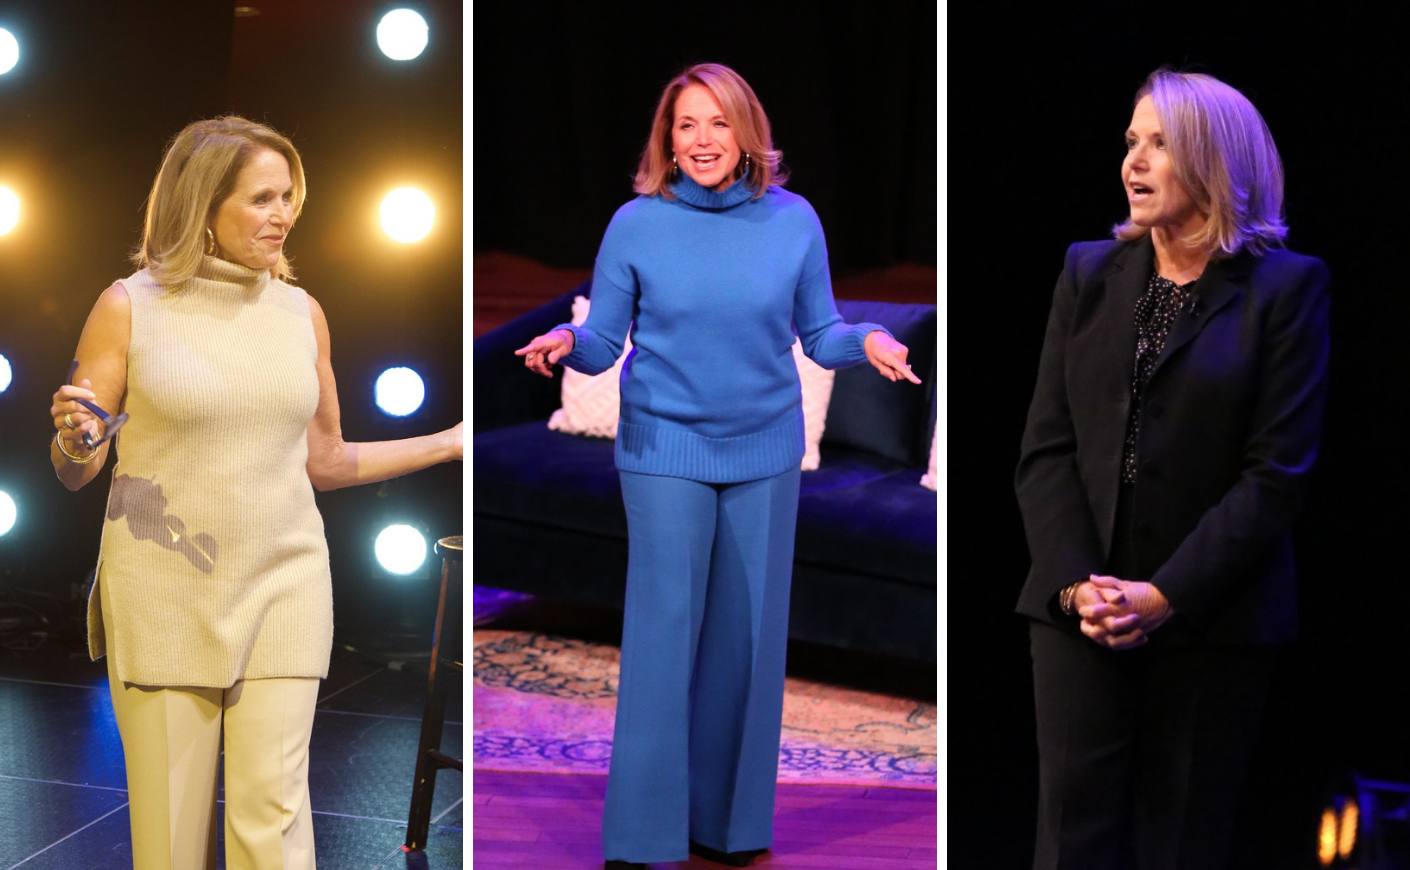 3 photos of Katie Couric on stage during her book tour